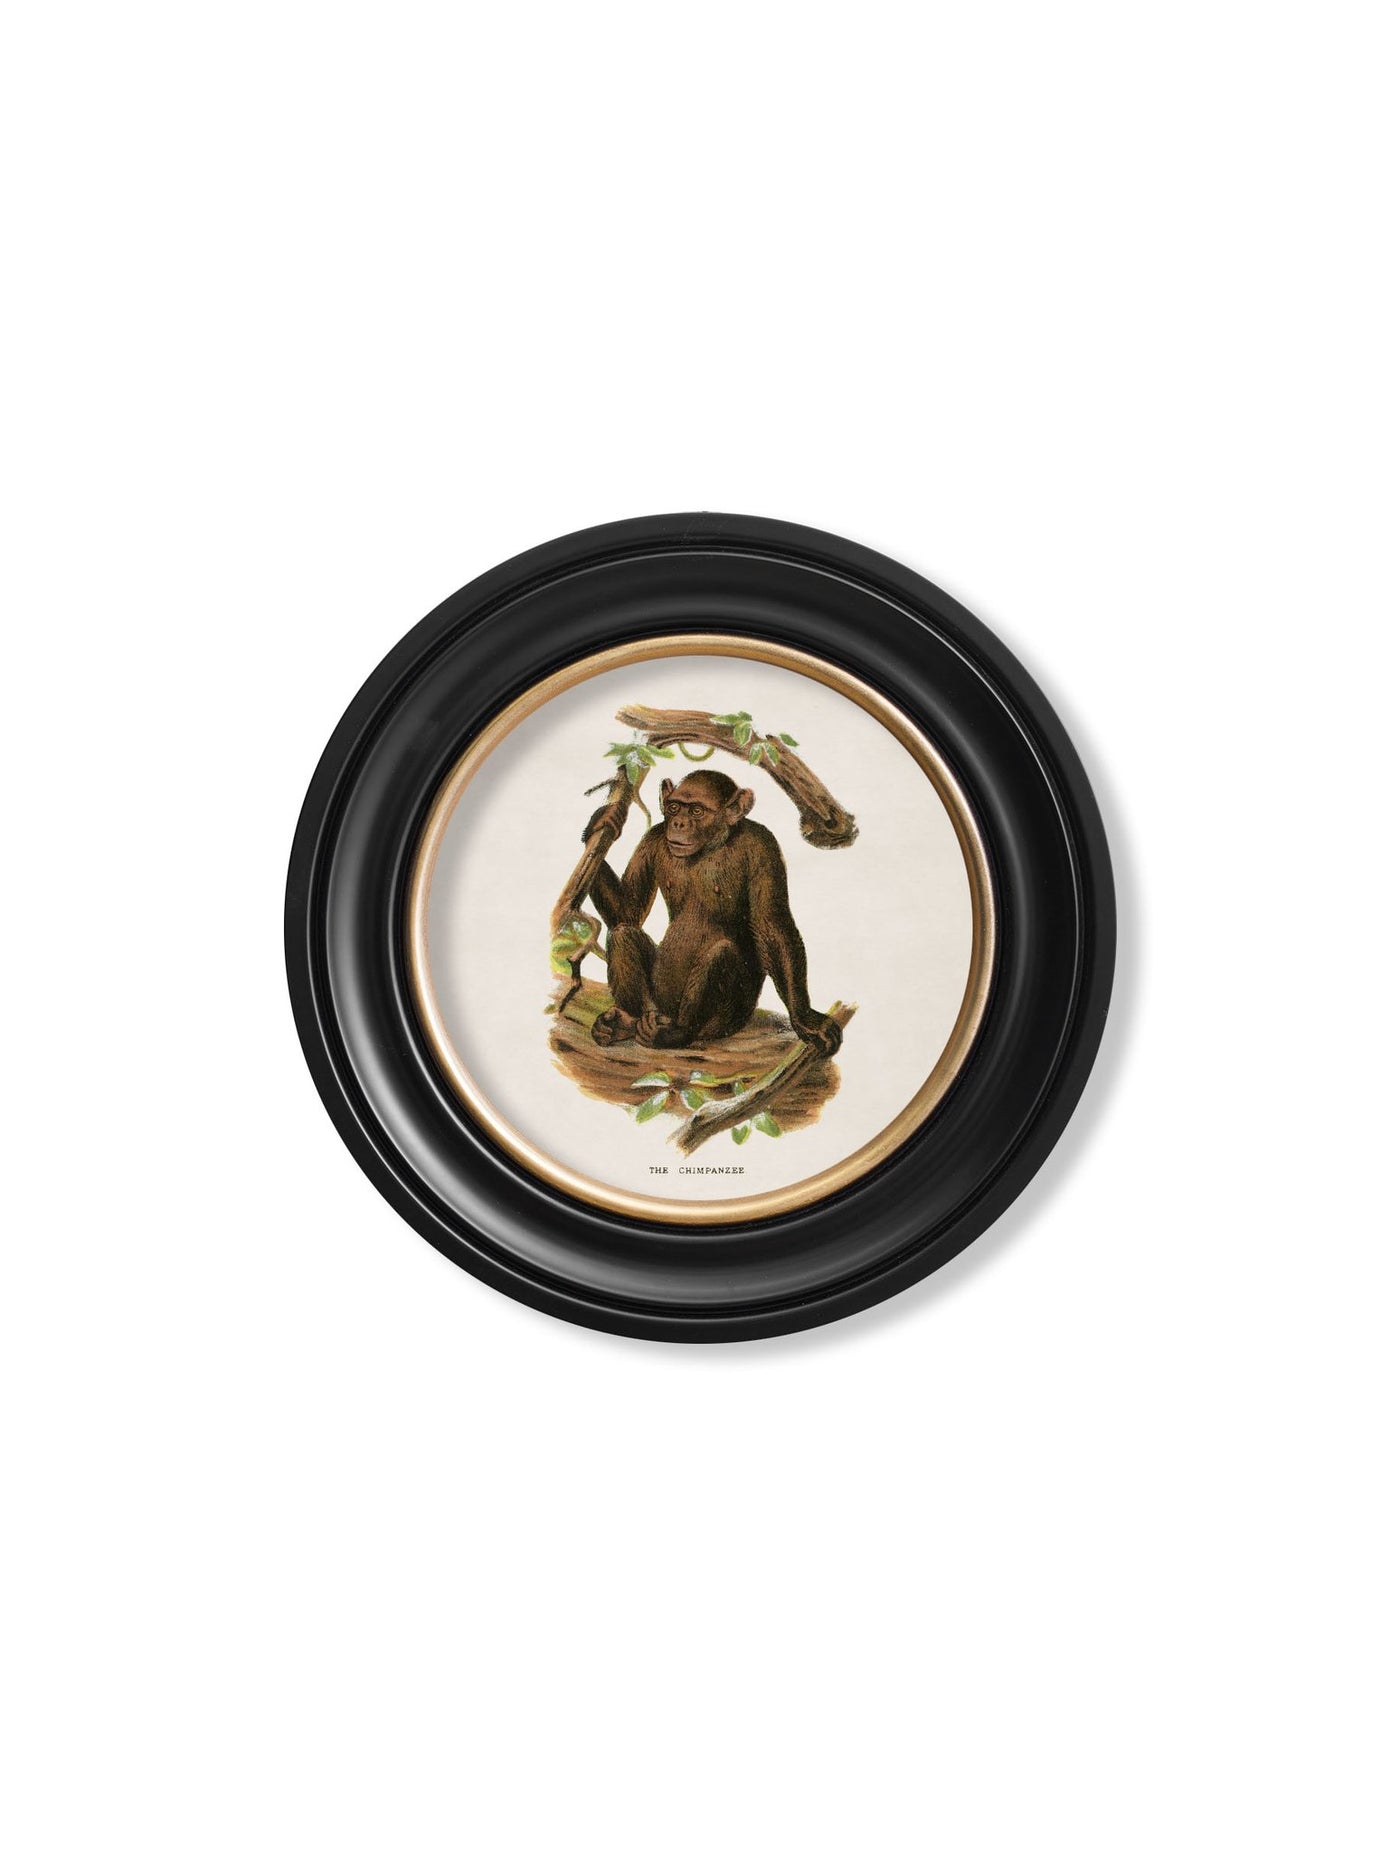 C.1910 COLLECTION OF PRIMATES IN ROUND FRAMES - TheArtistsQuarter